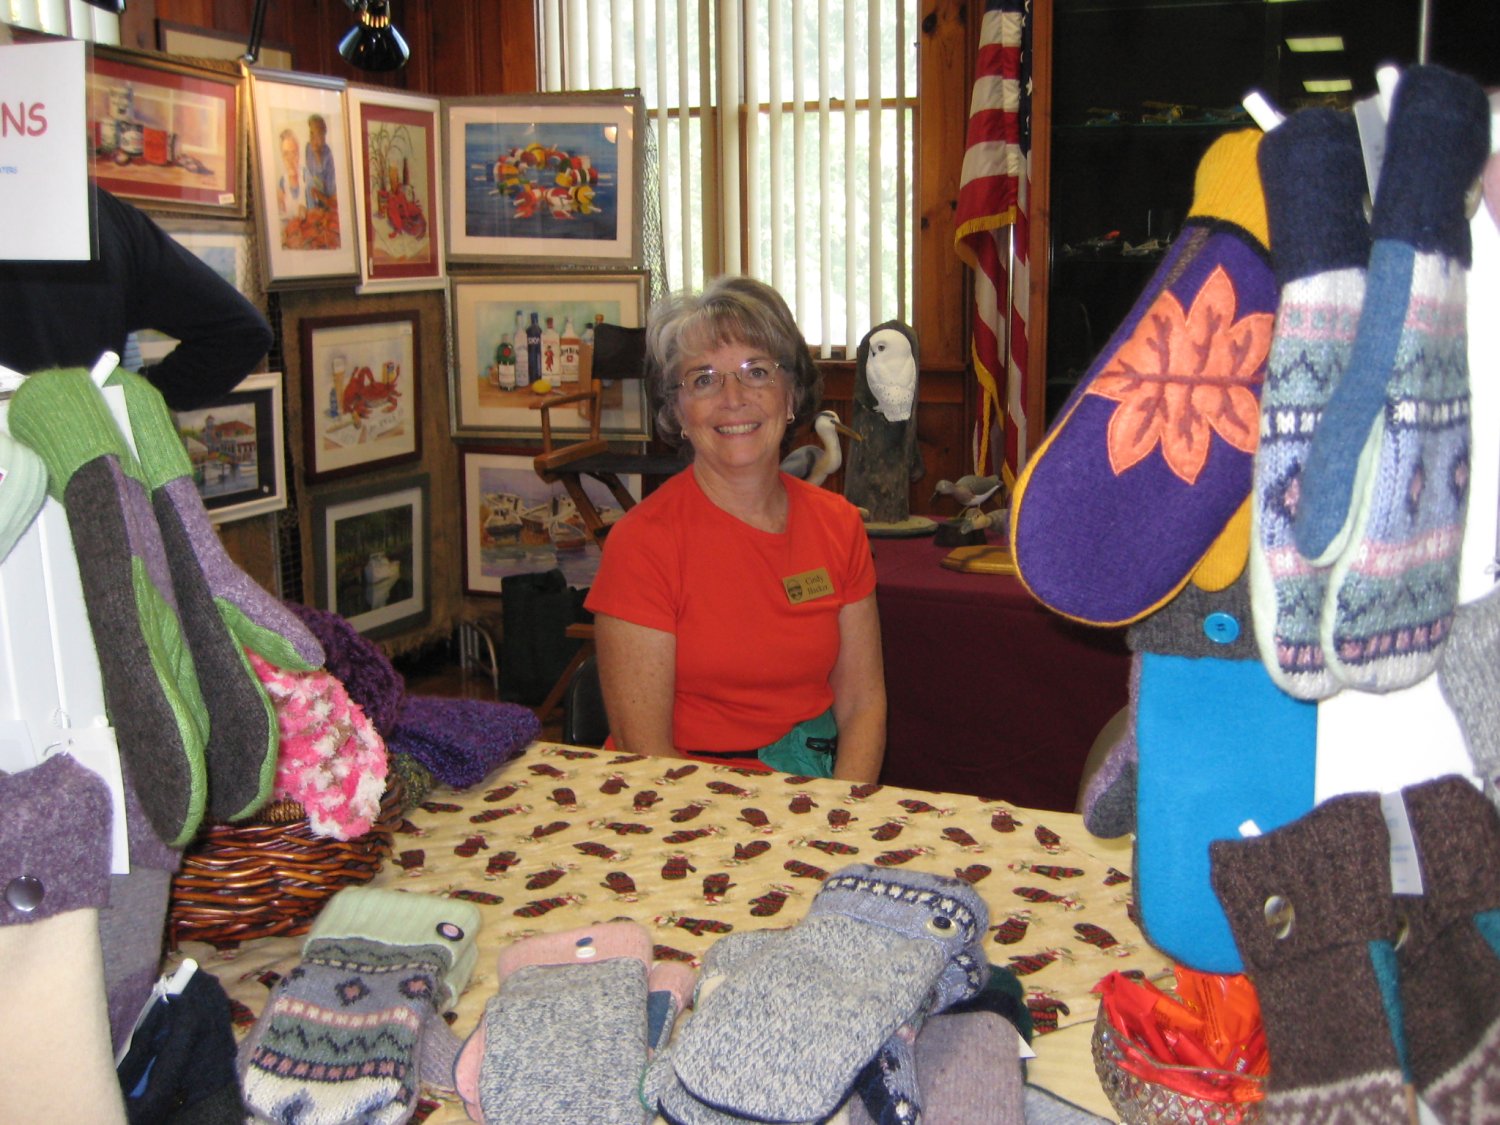  Cindy Backer's handmade wool mittens will warm many hands this coming winter.  